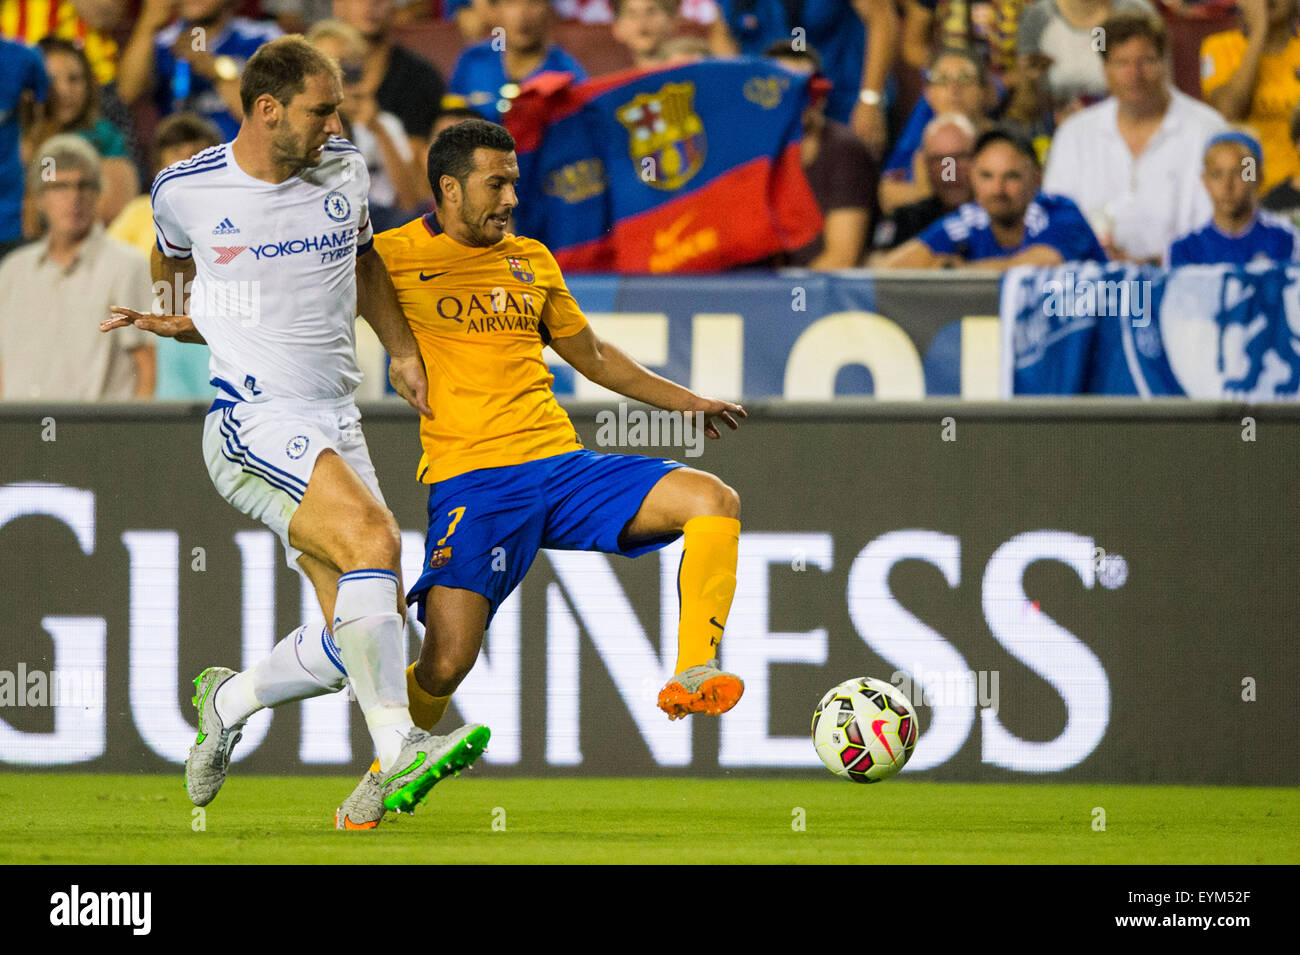 Landover, MD, USA. 28th July, 2015. #7 Barcelona F Pedro during the International  Champions Cup match between Chelsea FC and FC Barcelona at FedEx Field in  Landover, MD. Jacob Kupferman/CSM/Alamy Live News